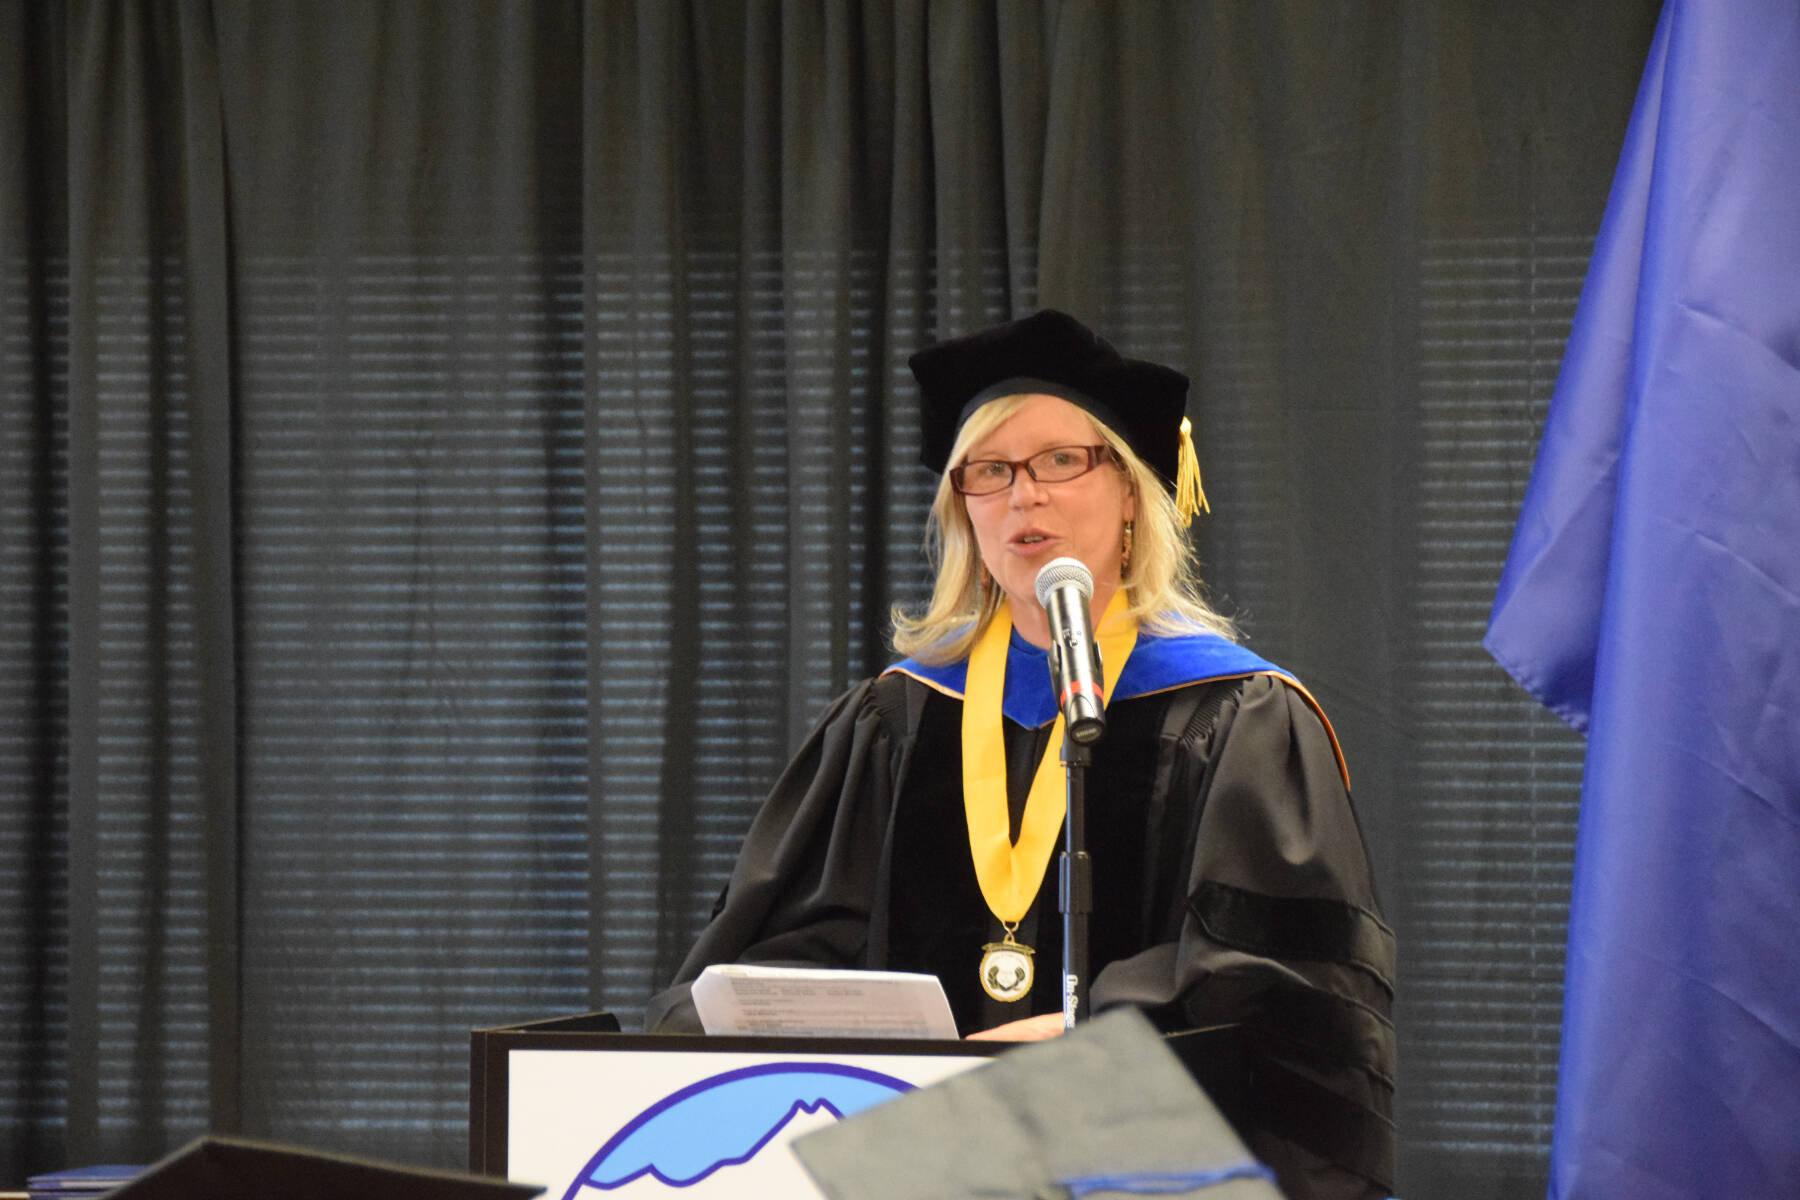 Kachemak Bay Campus Professor of Biology and Semester by the Bay coordinator Dr. Debbie Tobin presents the University of Alaska certificates and diplomas to graduates during the 2023 KBC Commencement on Wednesday, May 10, 2023, in Homer, Alaska. (Photo by Delcenia Cosman/Homer News)